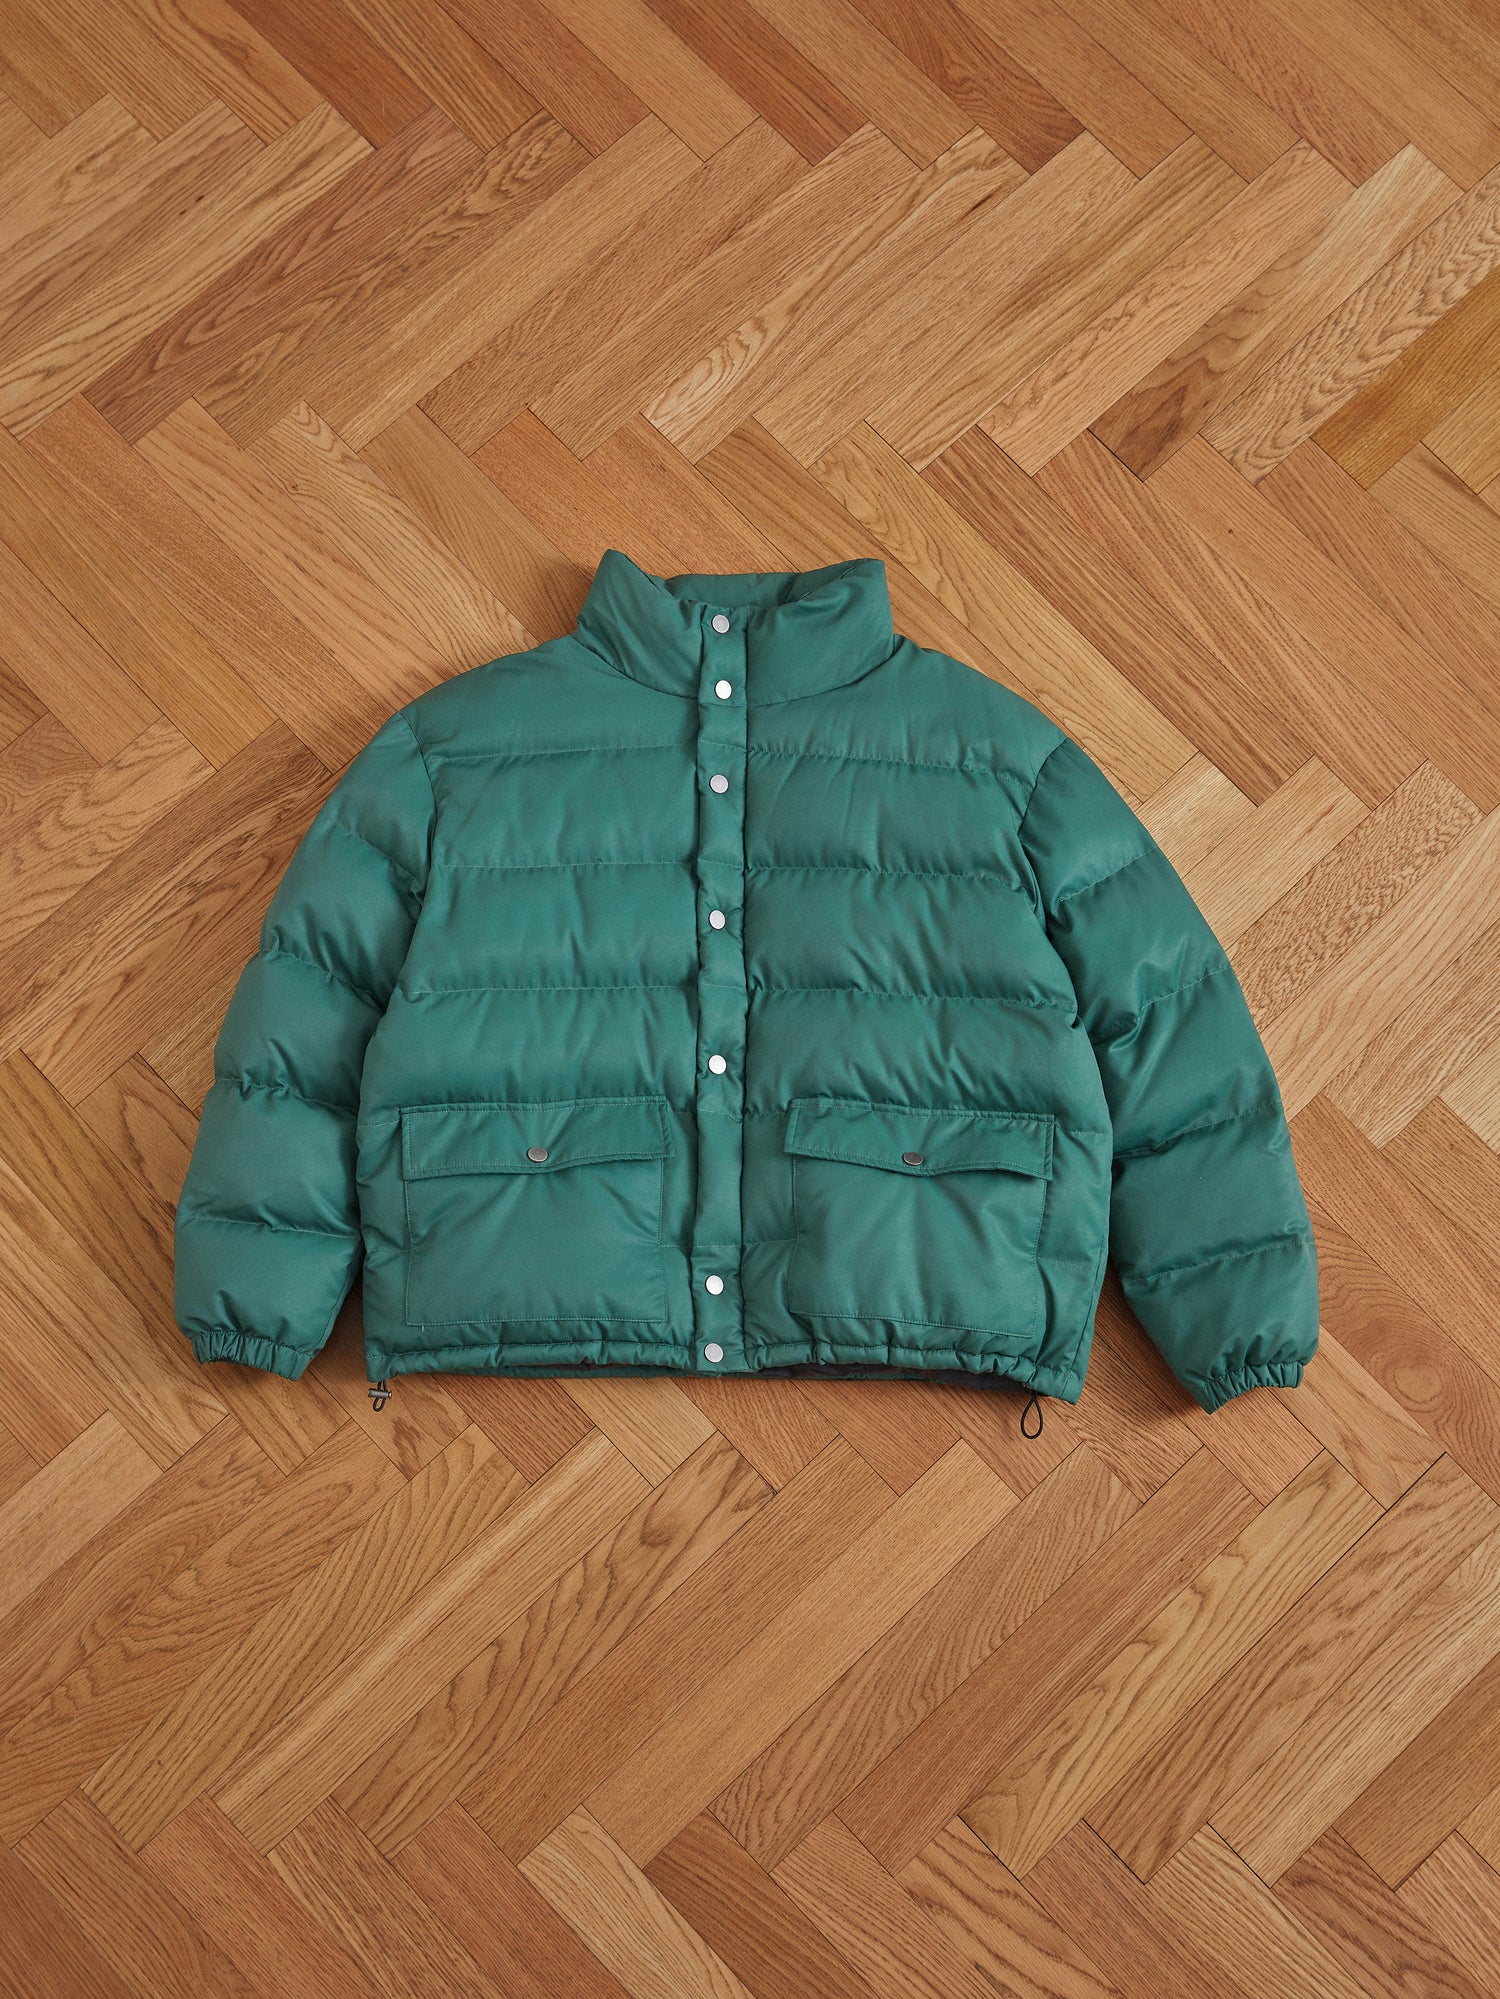 A deep green Found Laurel Pine Puffer Jacket with pockets laying on a wooden floor.